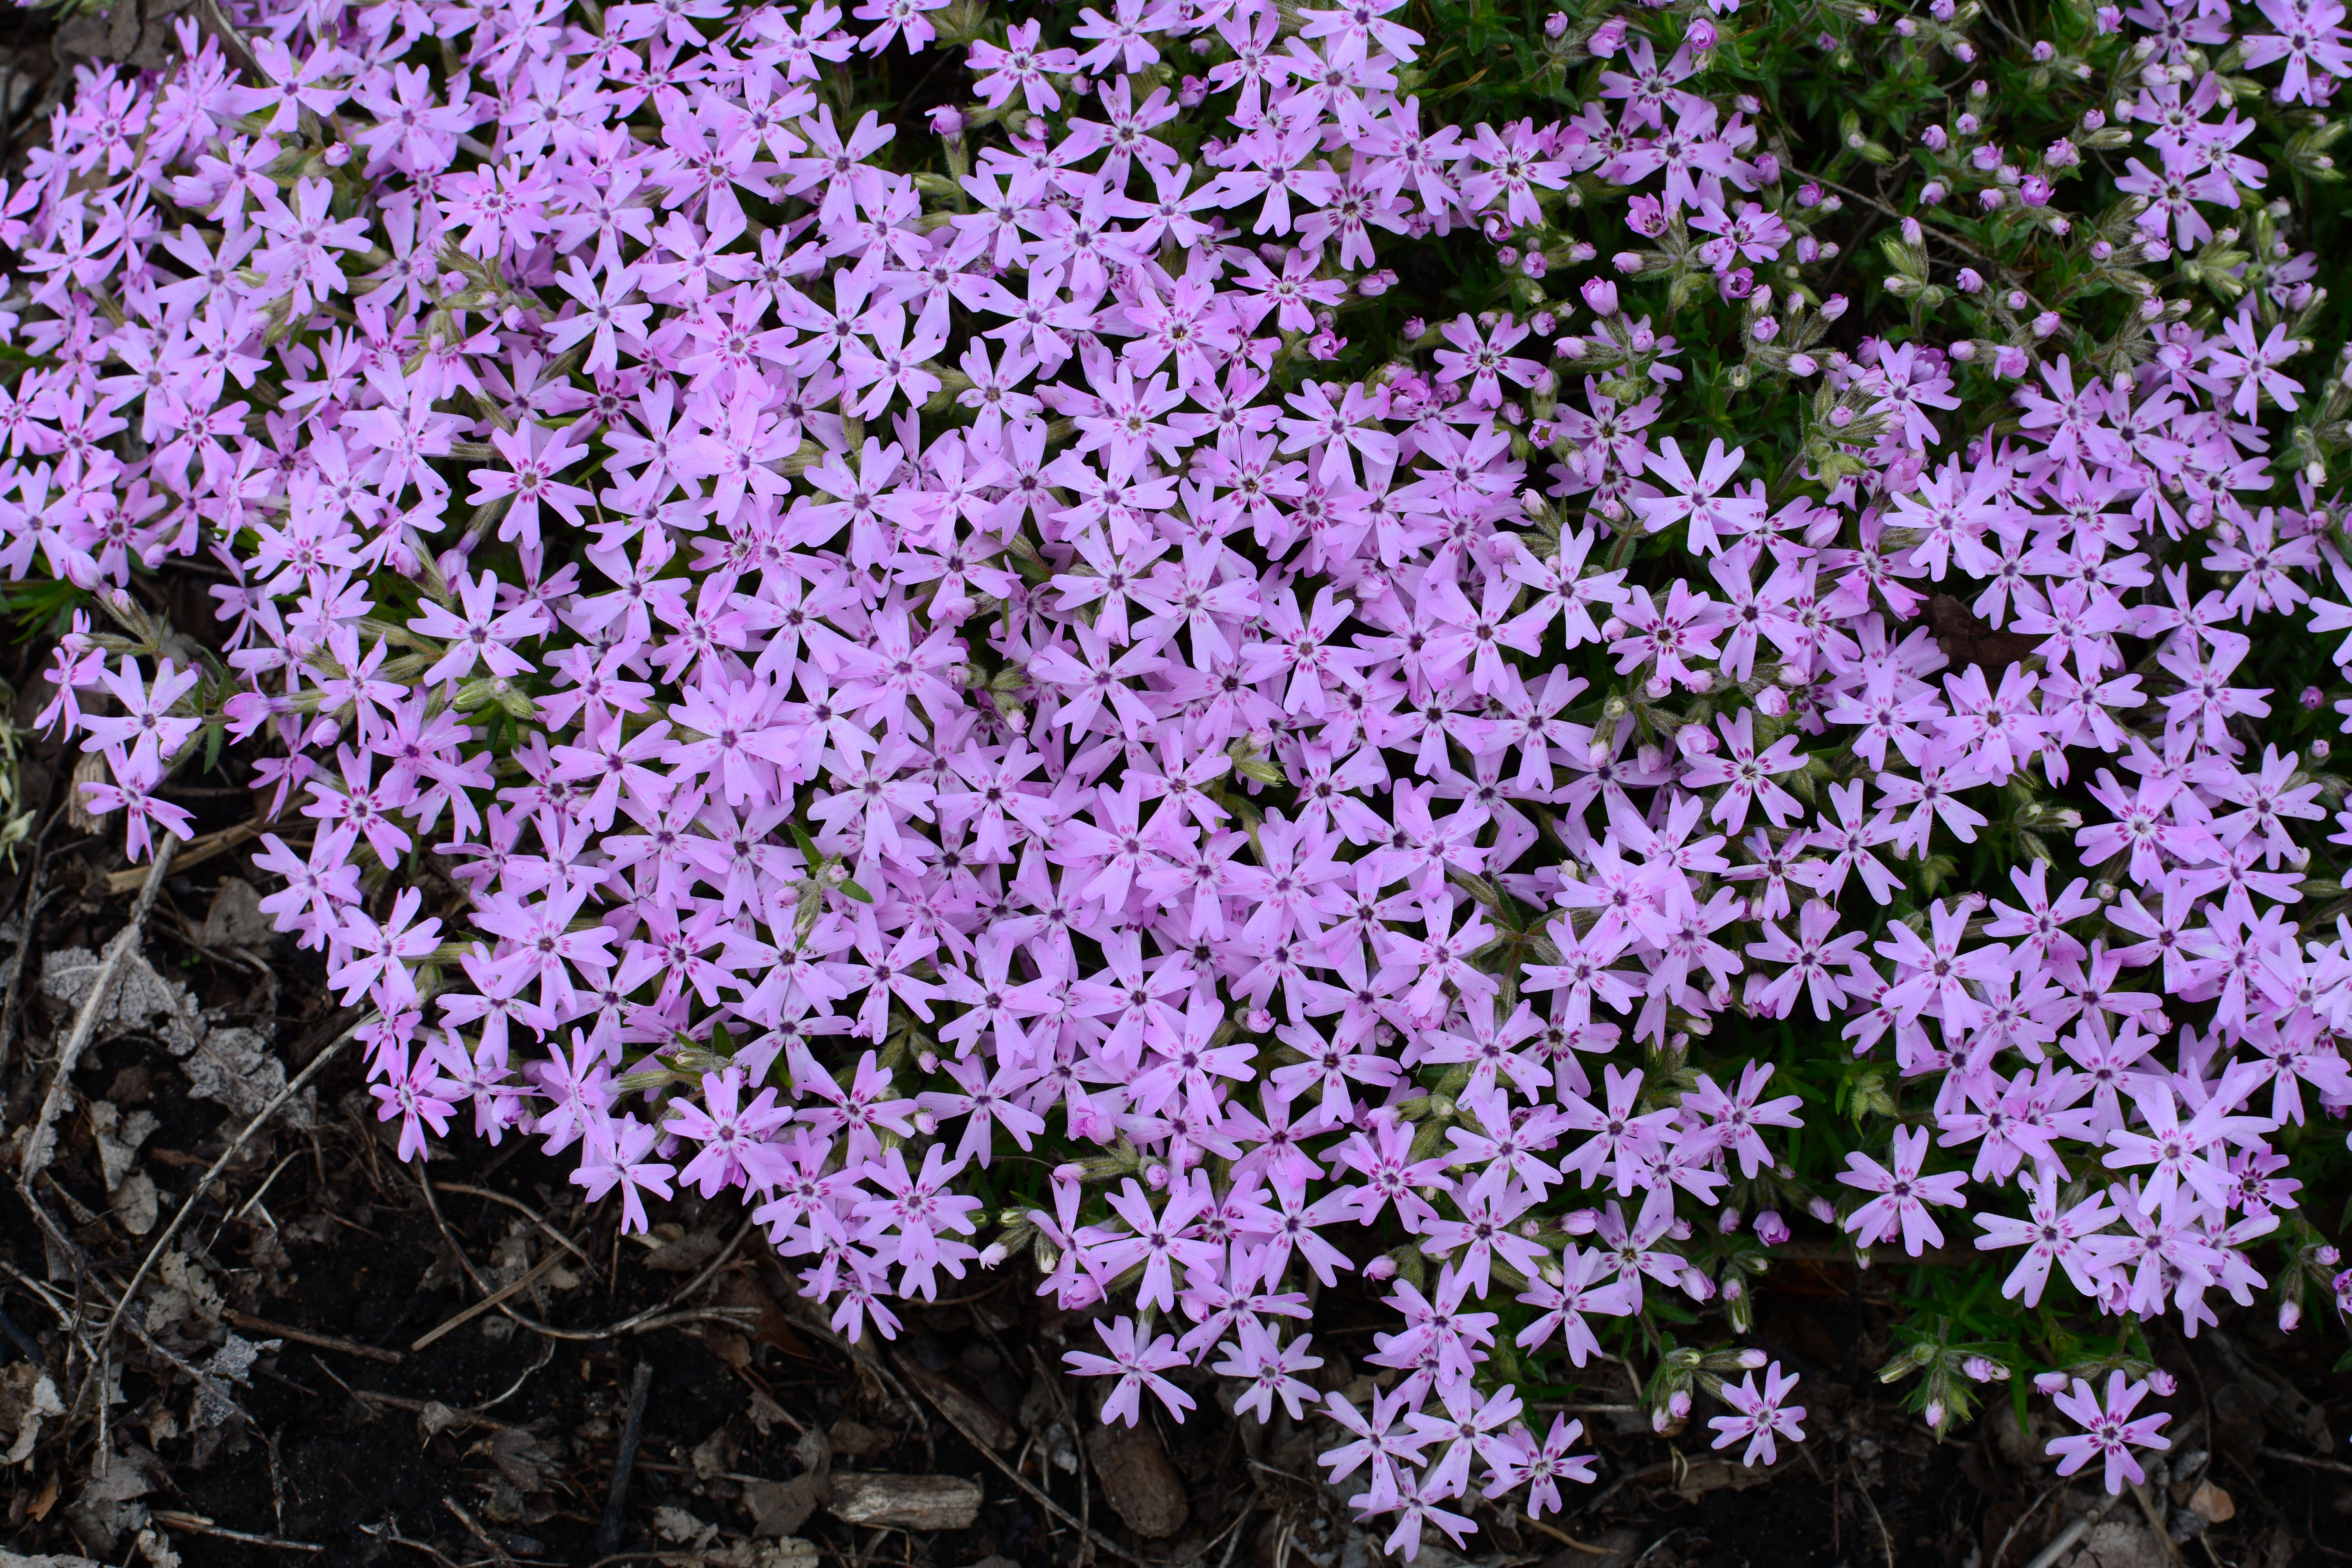 images/plants/phlox/phl-perfectly-puzzling/phl-perfectly-puzzling-0003.jpg